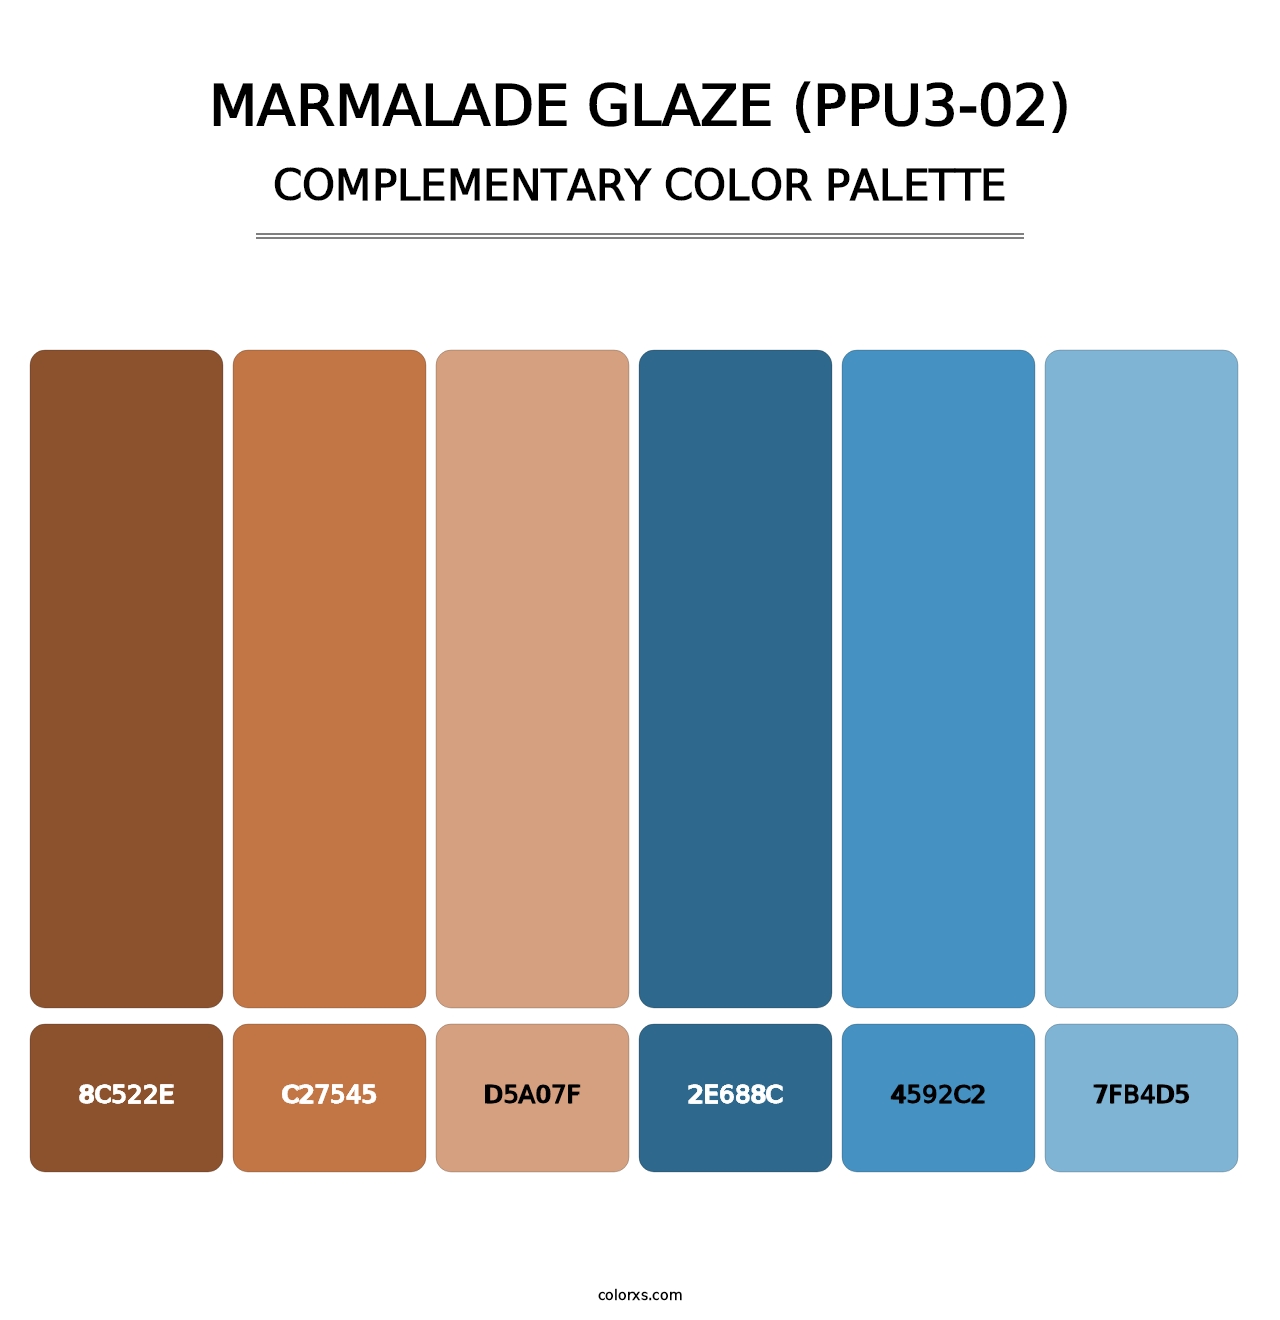 Marmalade Glaze (PPU3-02) - Complementary Color Palette